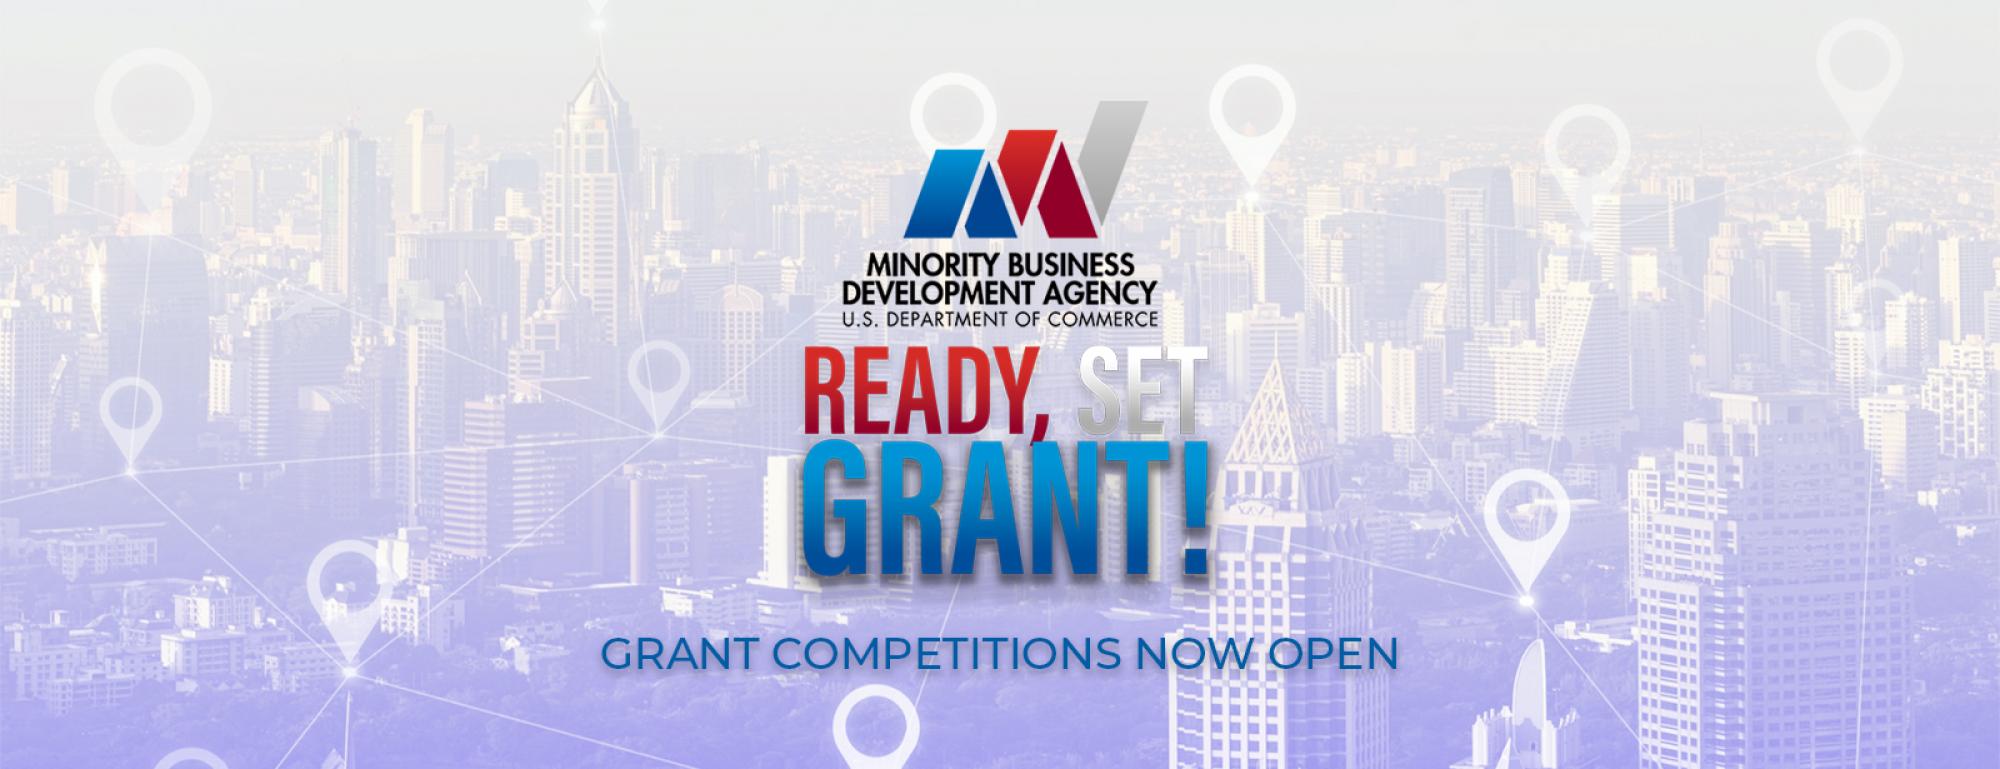 MBDA Ready Set Grant! | Grant Competitions Now Open